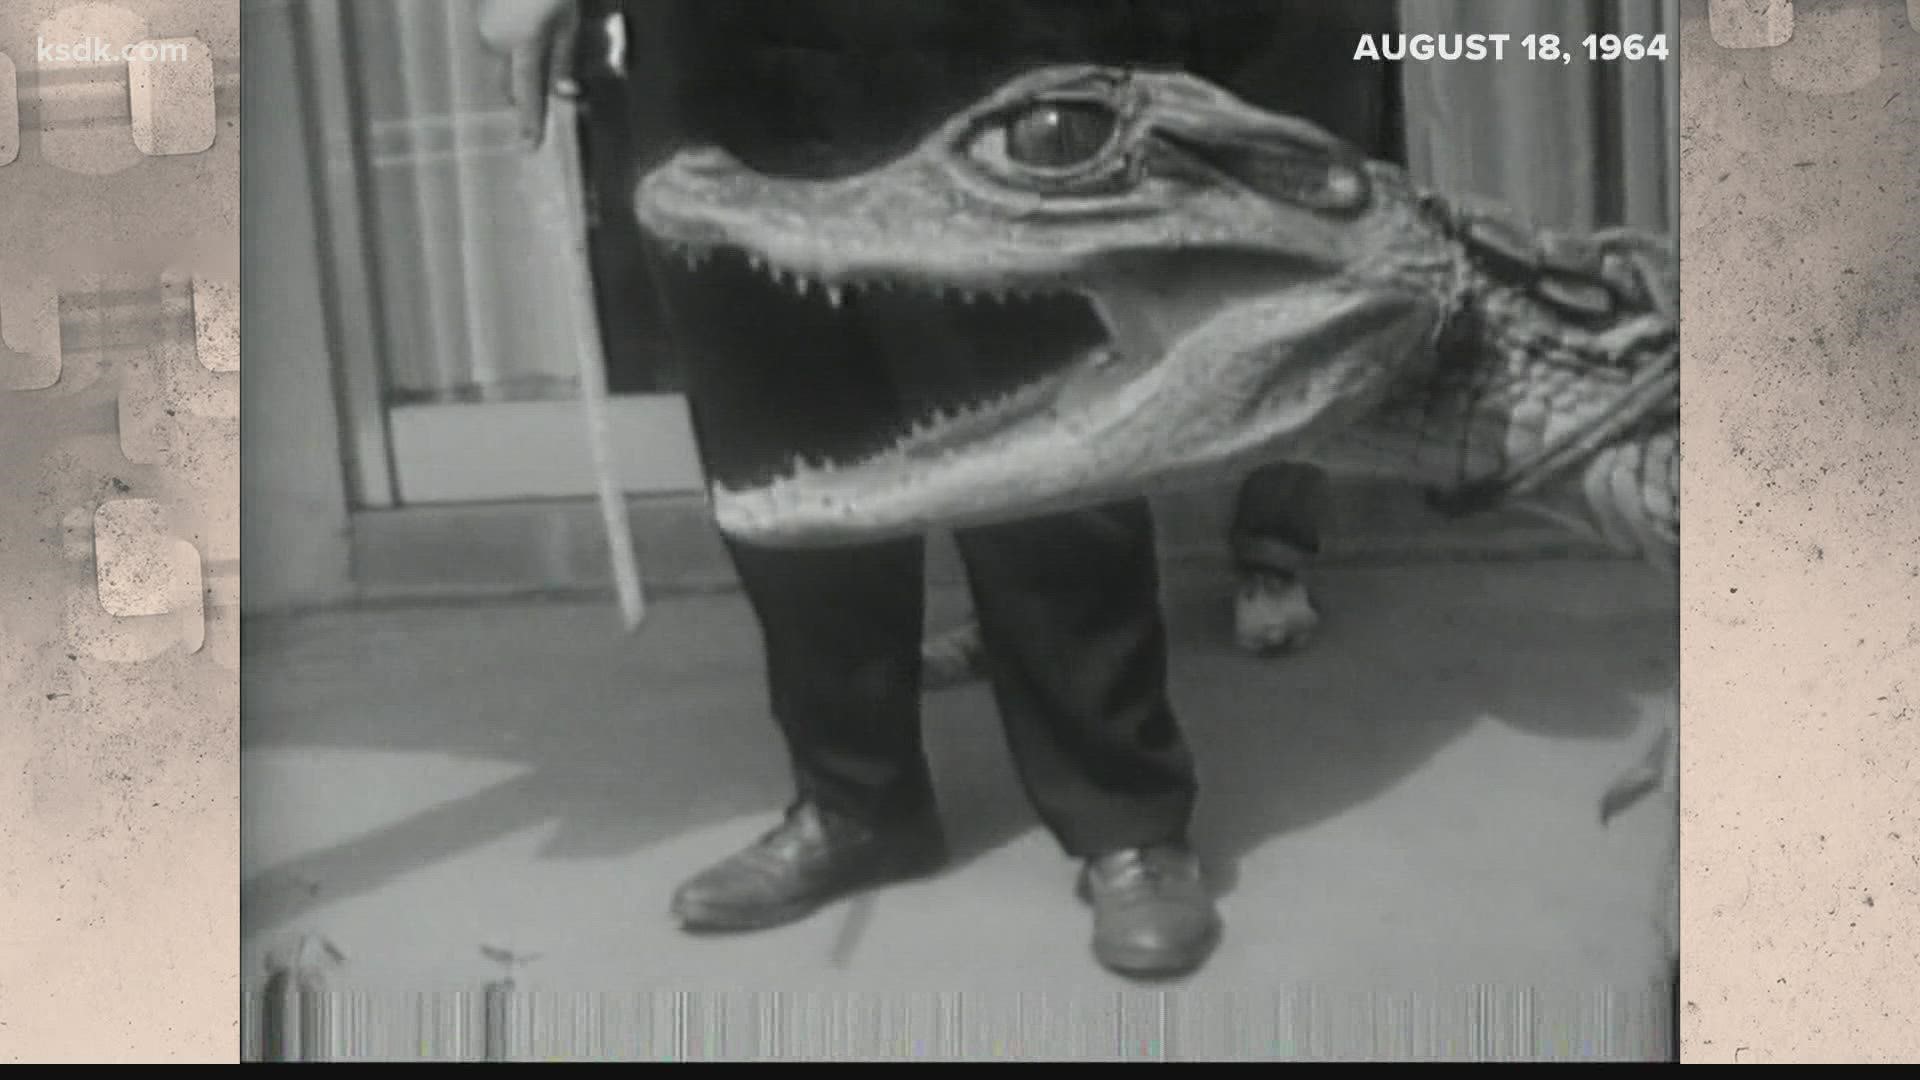 In 1964, boys found two baby alligators in Coldwater Creek